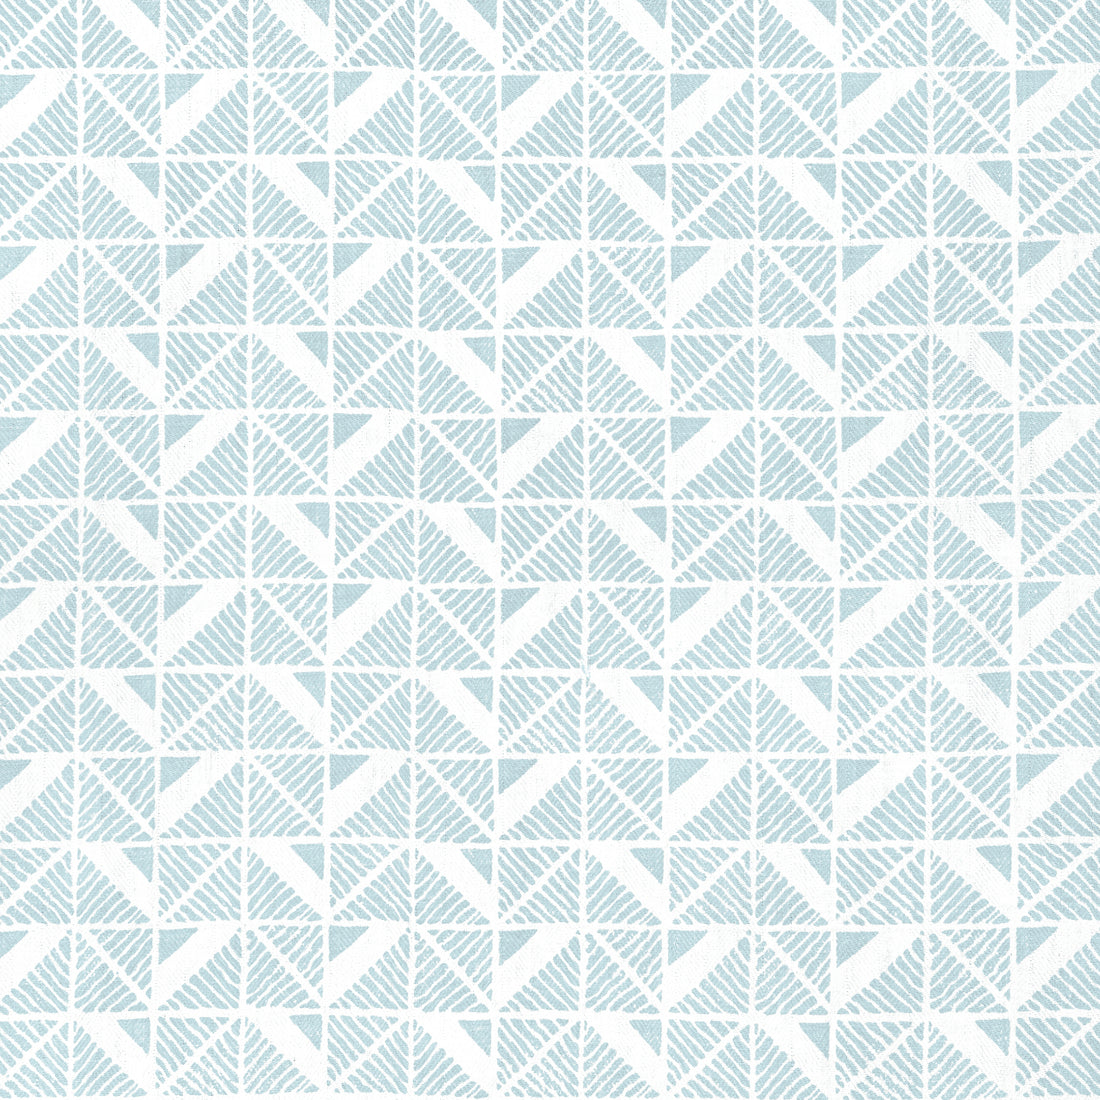 Bloomsbury Square fabric in soft blue color - pattern number AF23114 - by Anna French in the Willow Tree collection